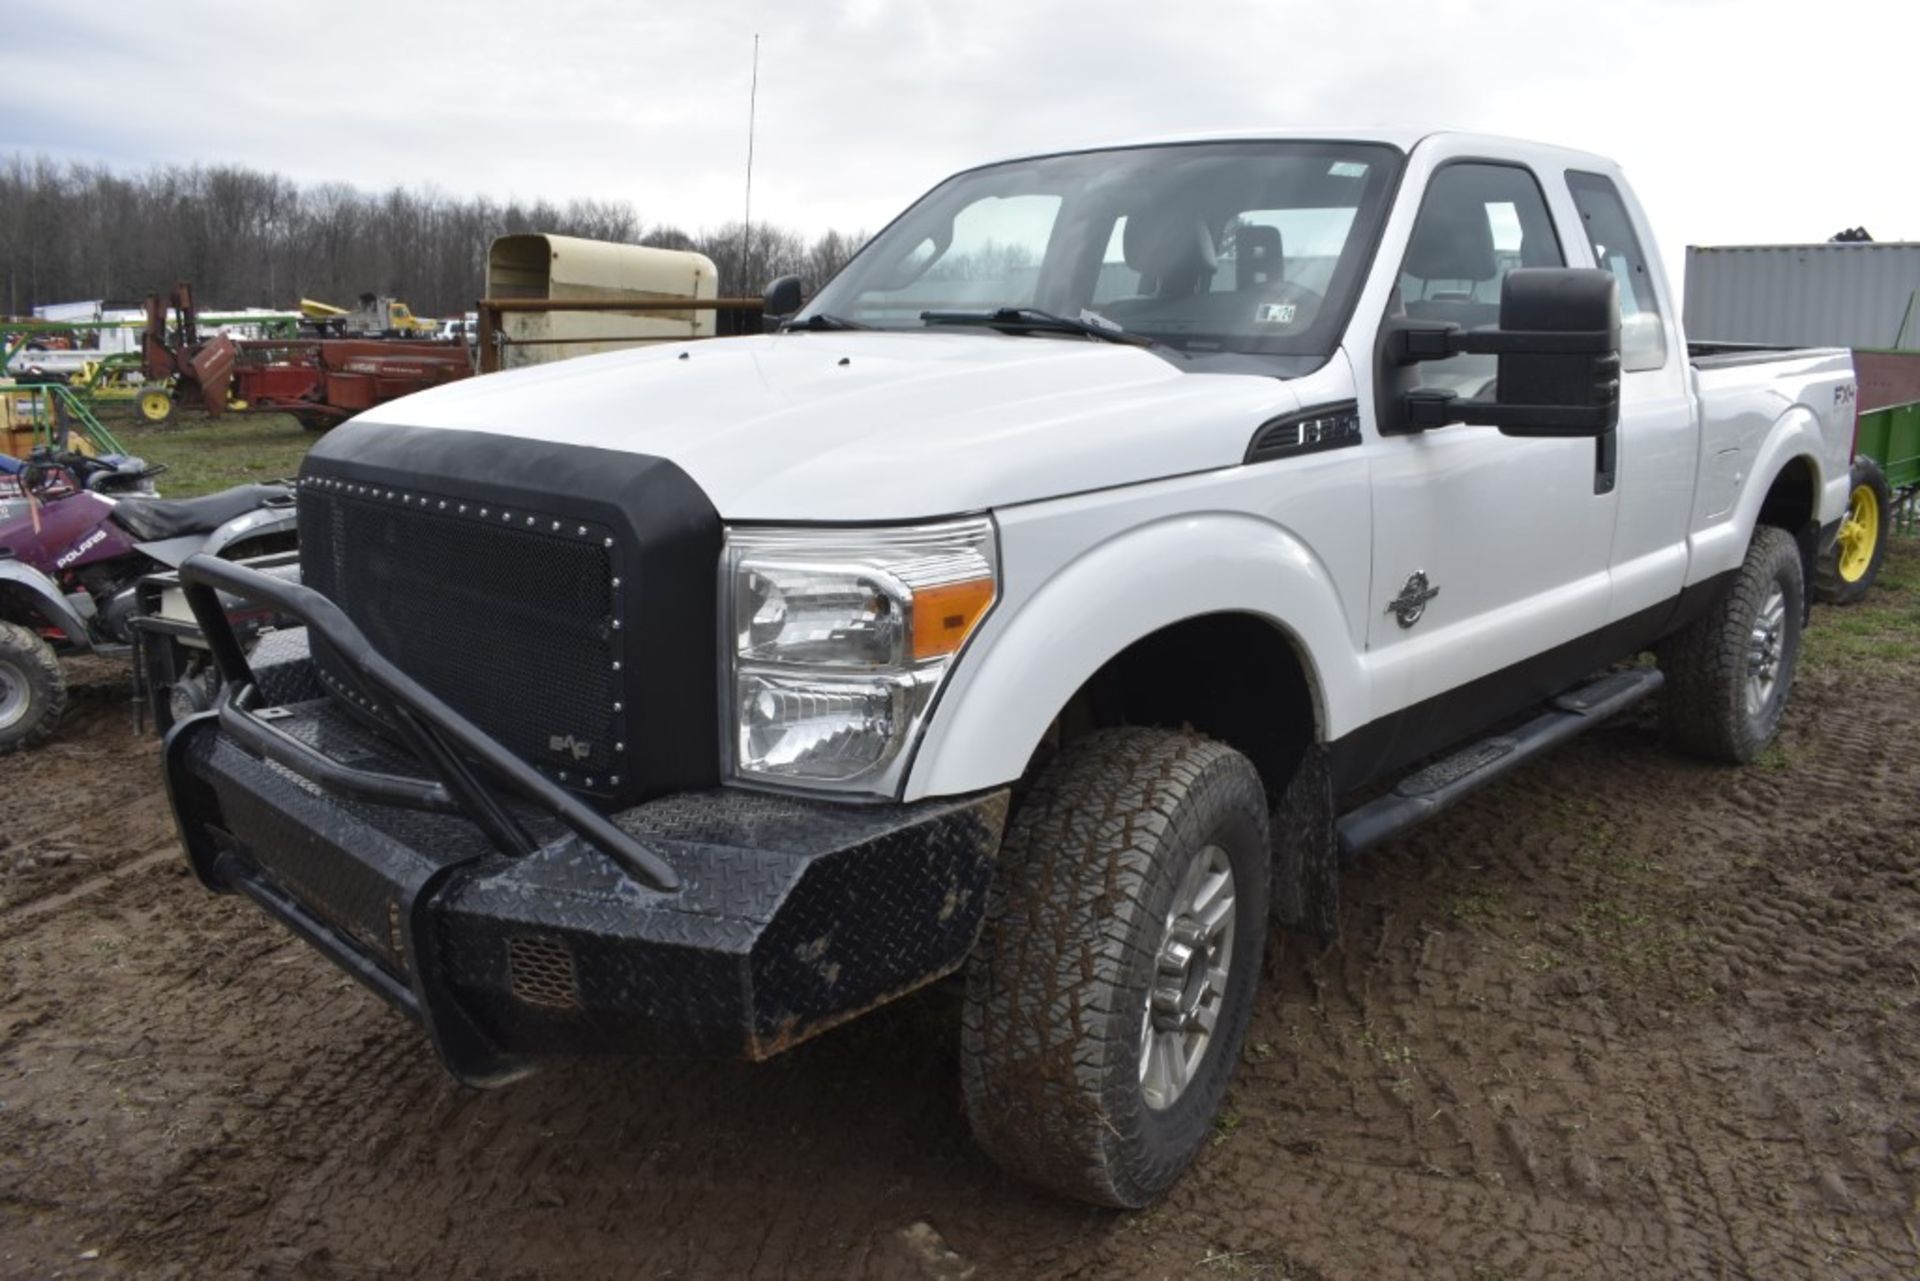 2011 Ford F-250 Super Duty Truck - Image 5 of 40